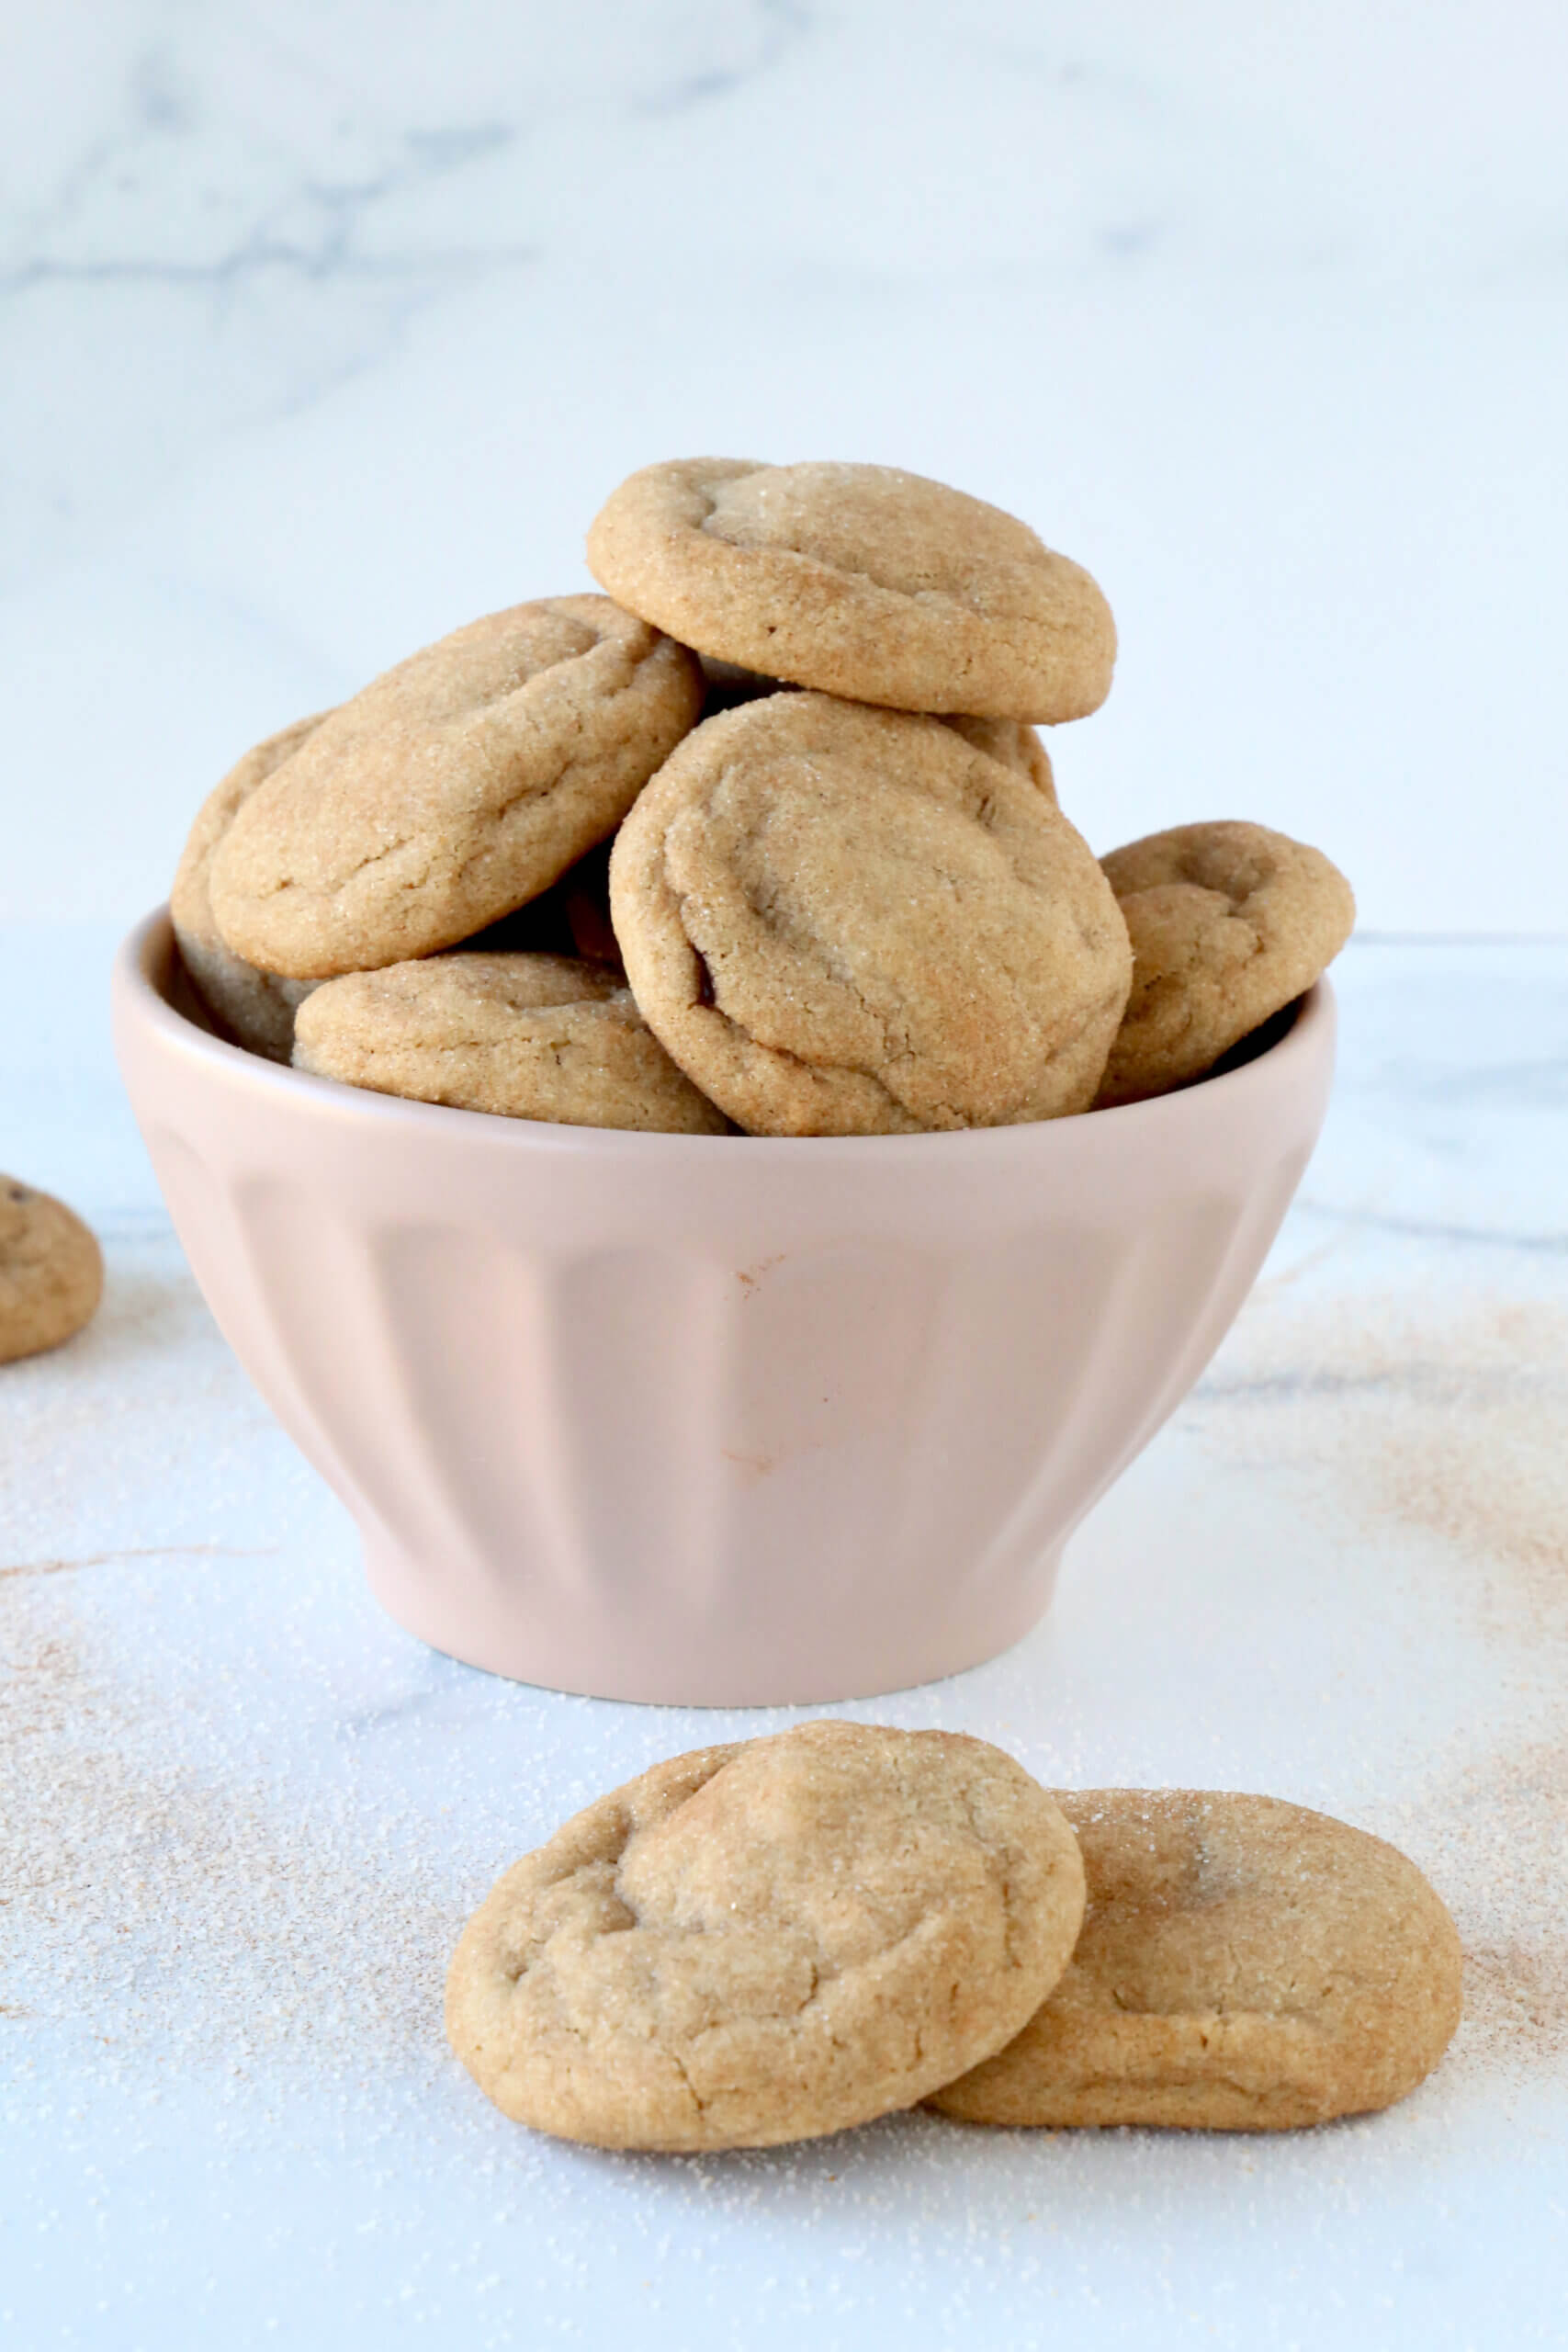 A pink bowl filled with small round cookies and two cookies sitting in the front.